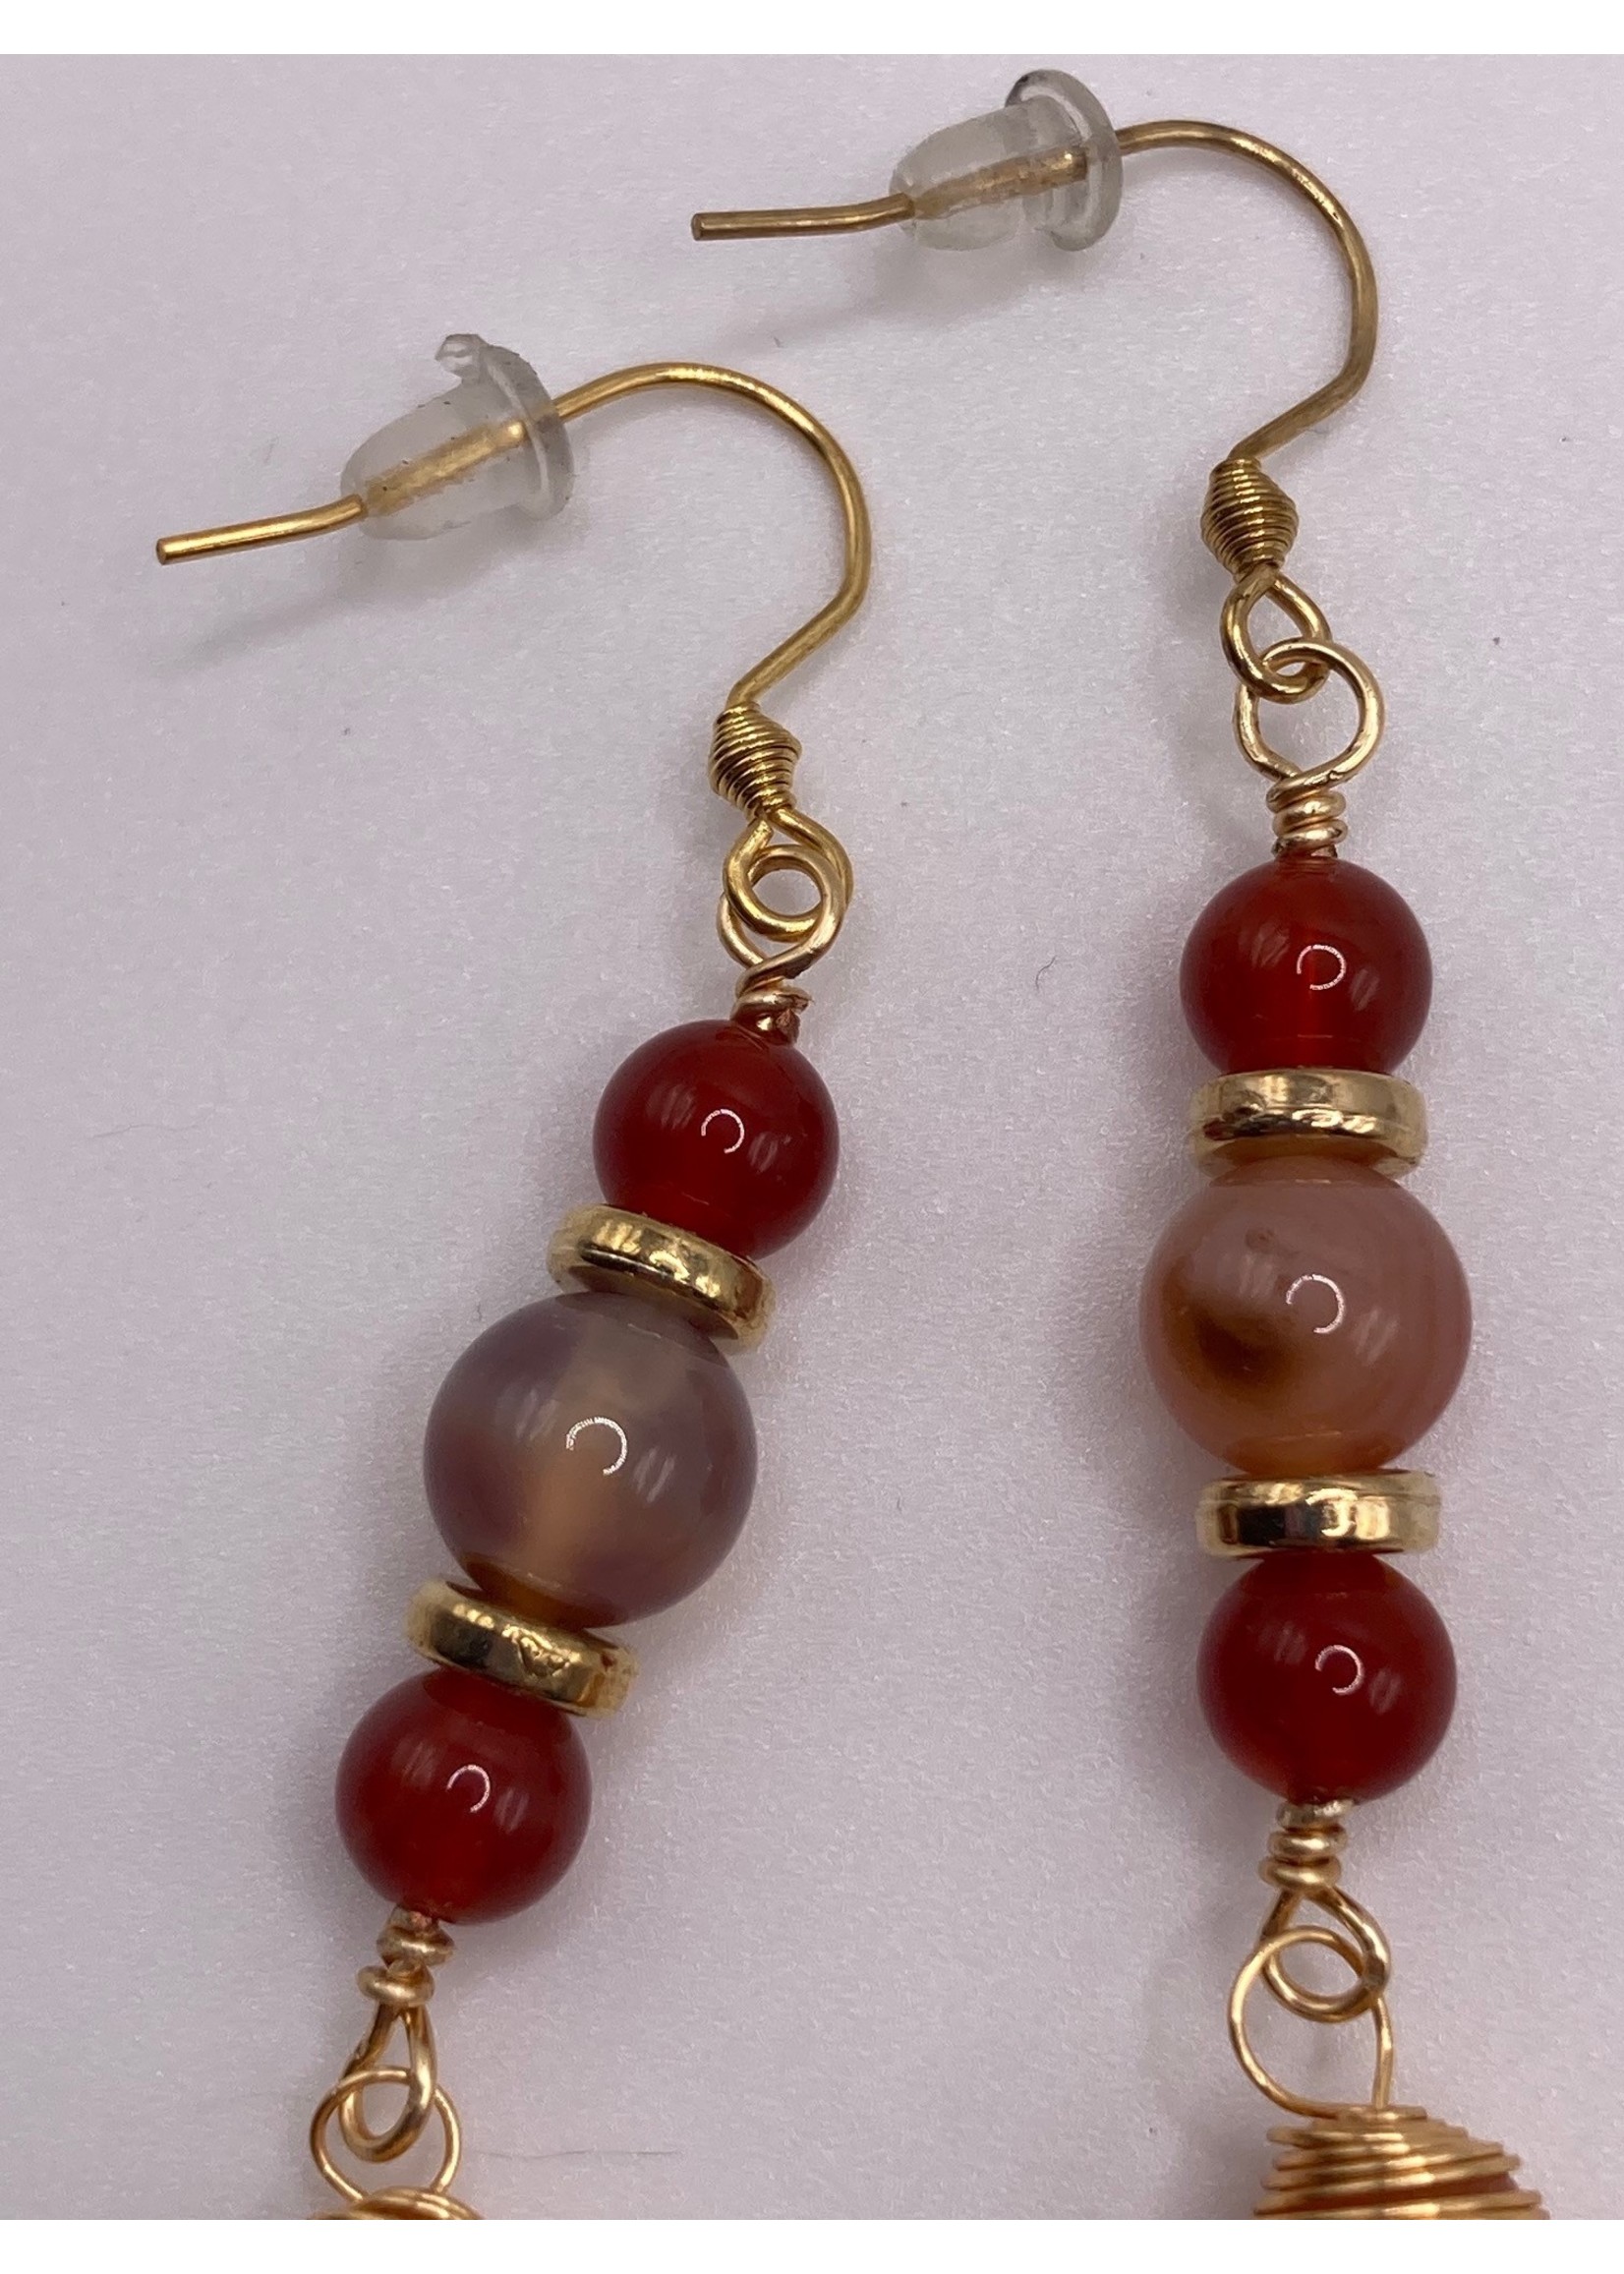 Our Twisted Dahlia Carnelian Agate and Agate with Gold Accents Earrings